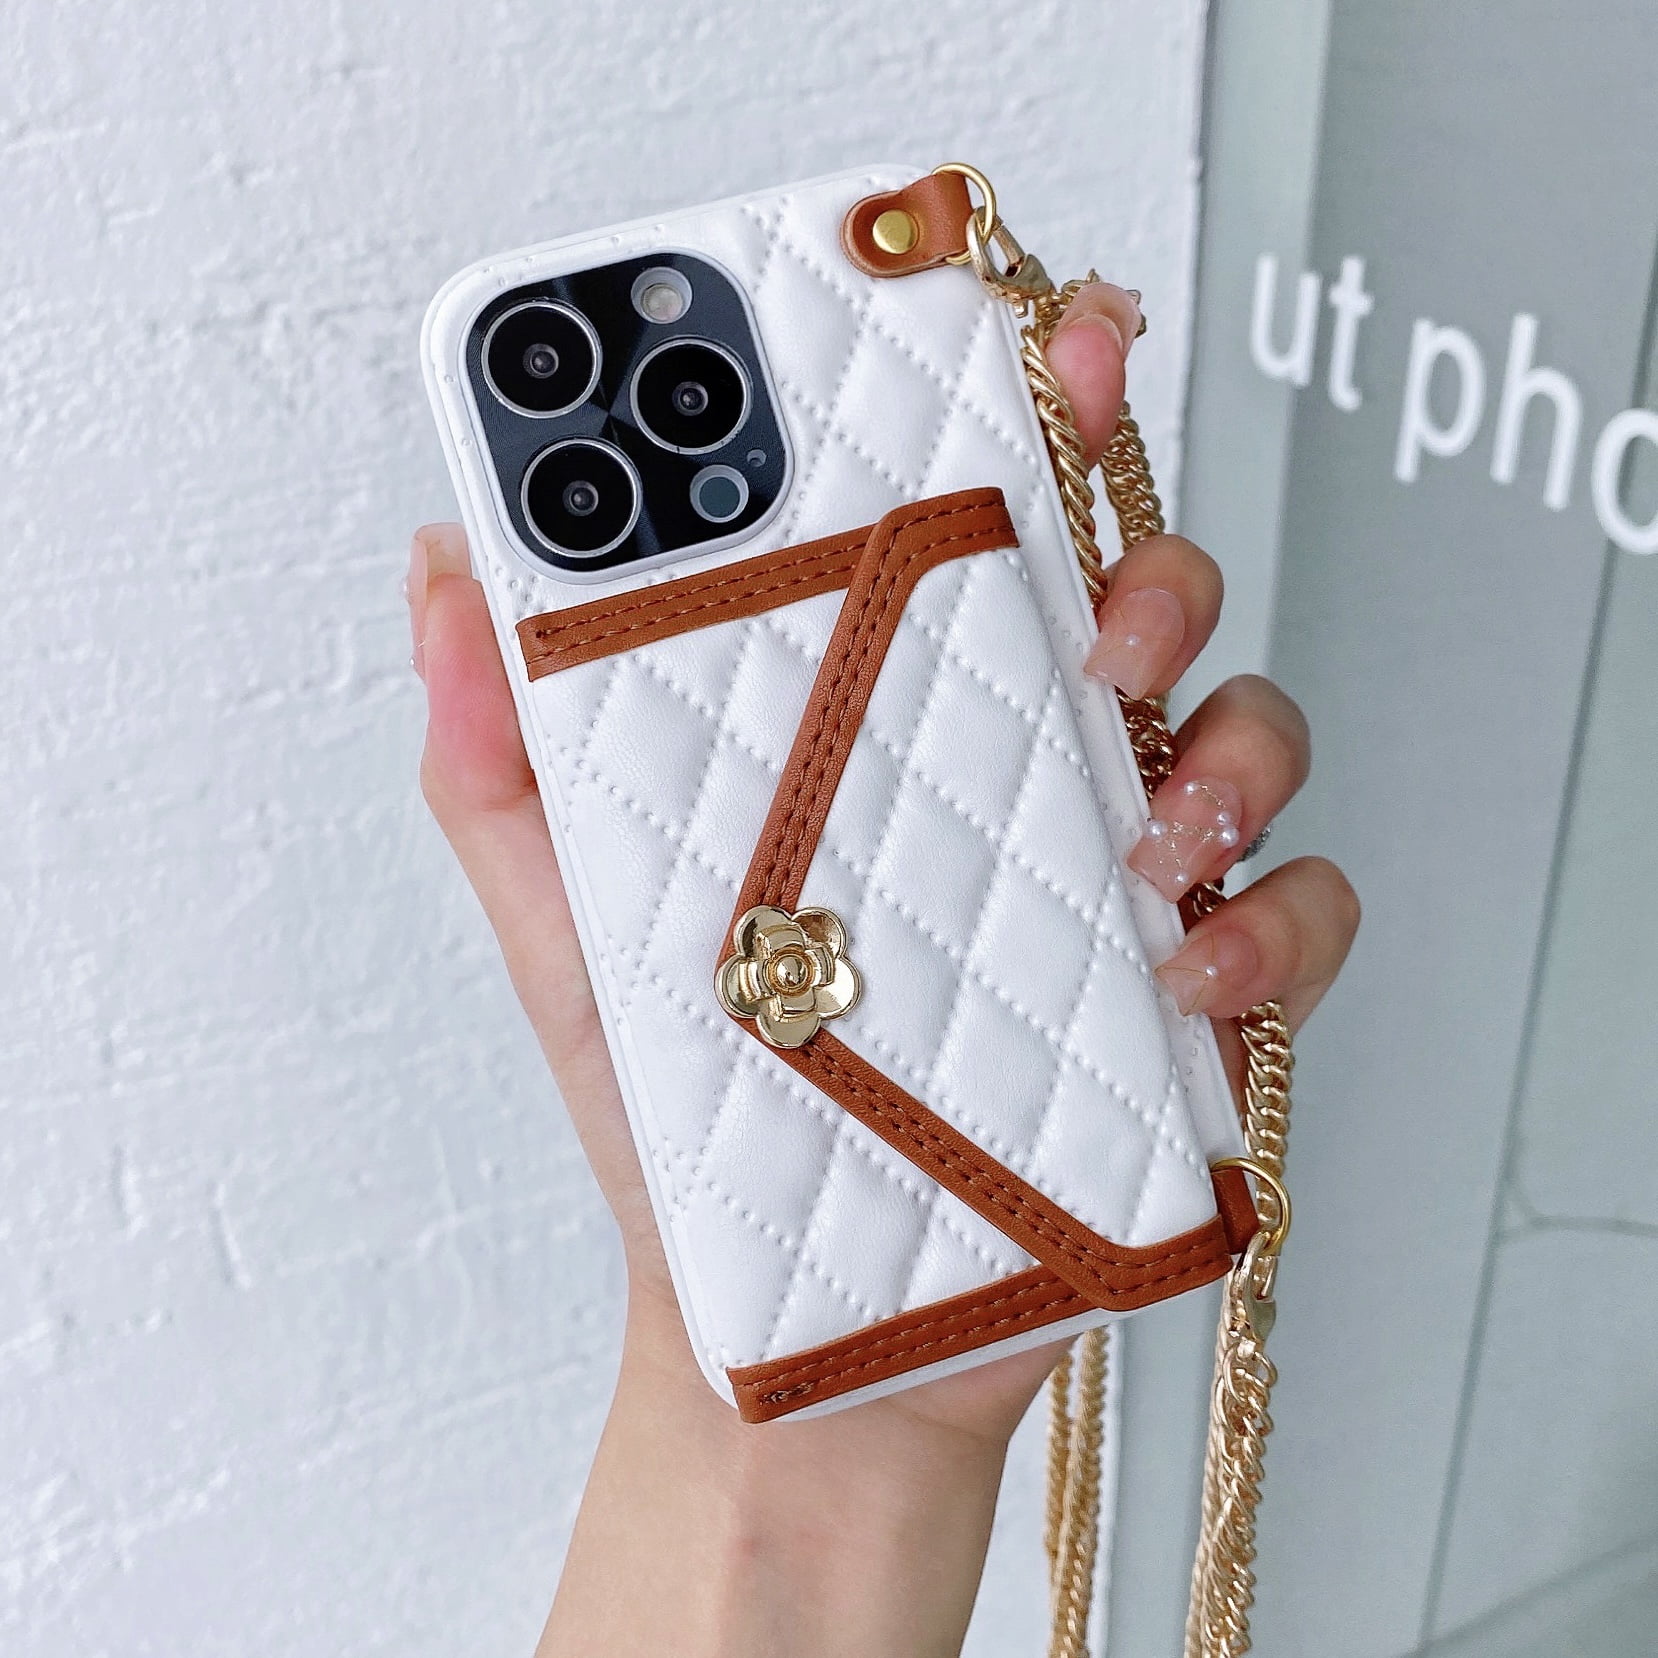 Chanel iPhone14 Pro14 ProMax case here mark card storage cute cocobuyee  sitehttpscocobuyeecomproductschaneliphone14promax14caseVariantsId21800  iPhone1414 Pro14 ProMax cases from Chanel have arrived Features an  iconic quilted design and 